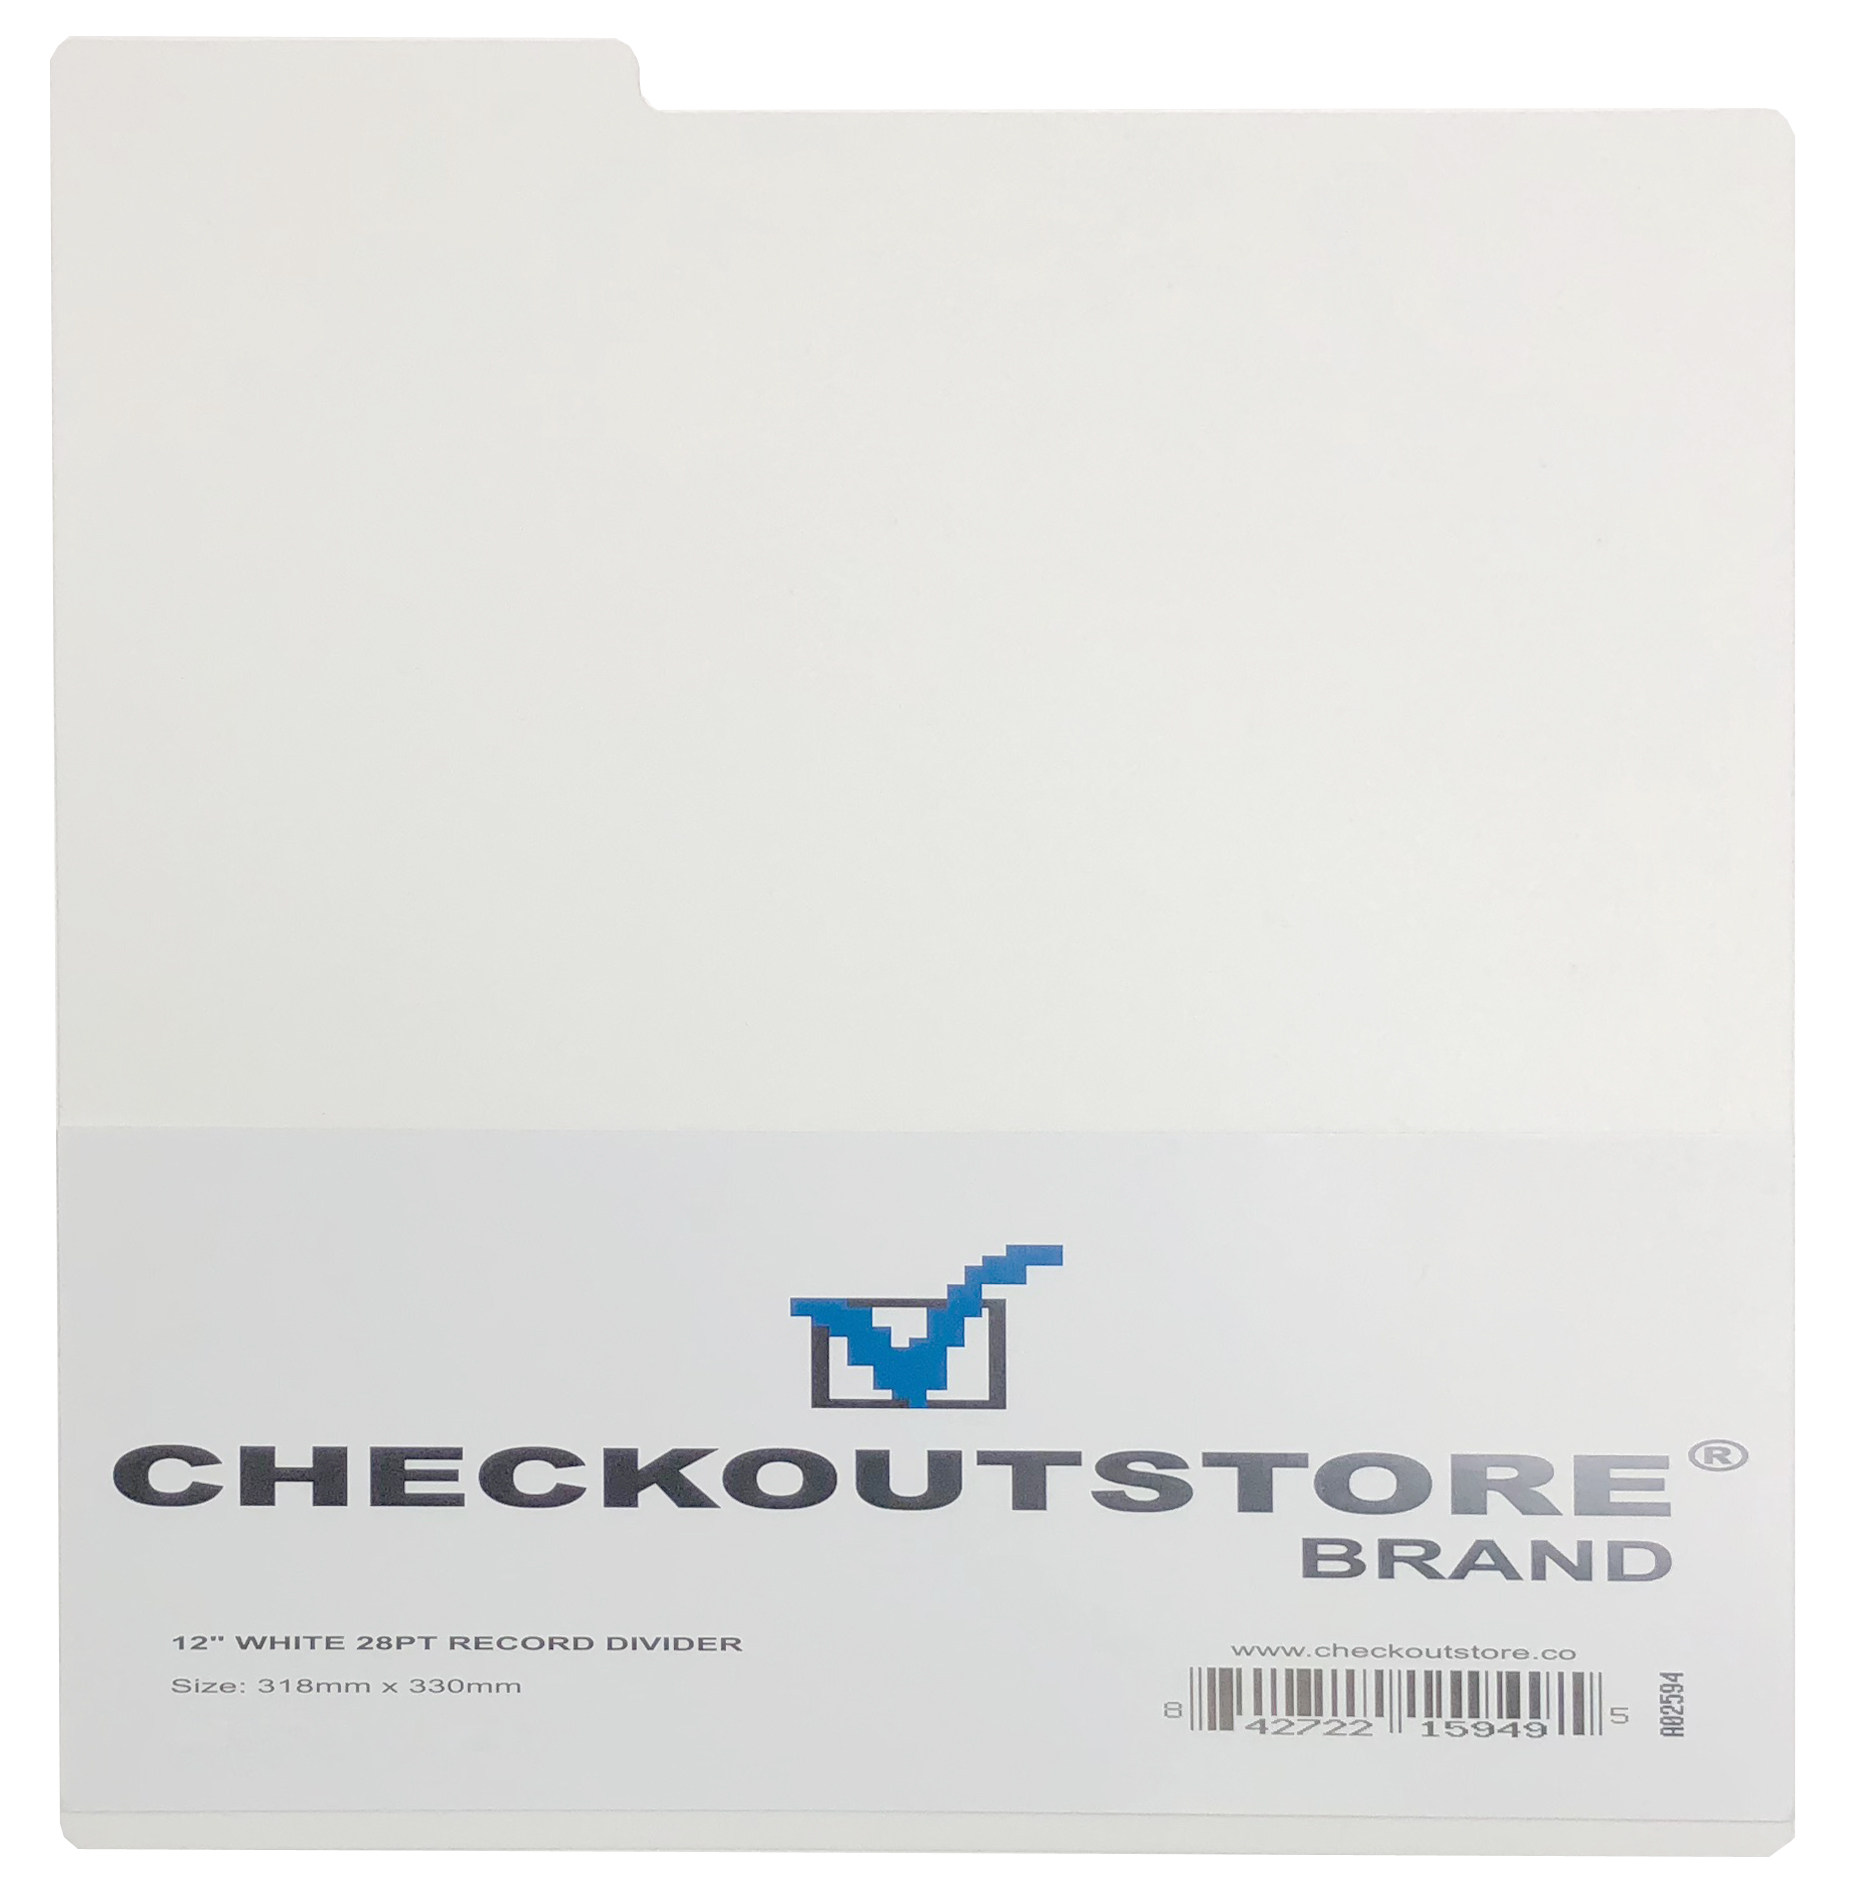 Image of ID 1214260850 100 CheckOutStore White Plastic Record Dividers for 12" LP Vinyl 33 RPM